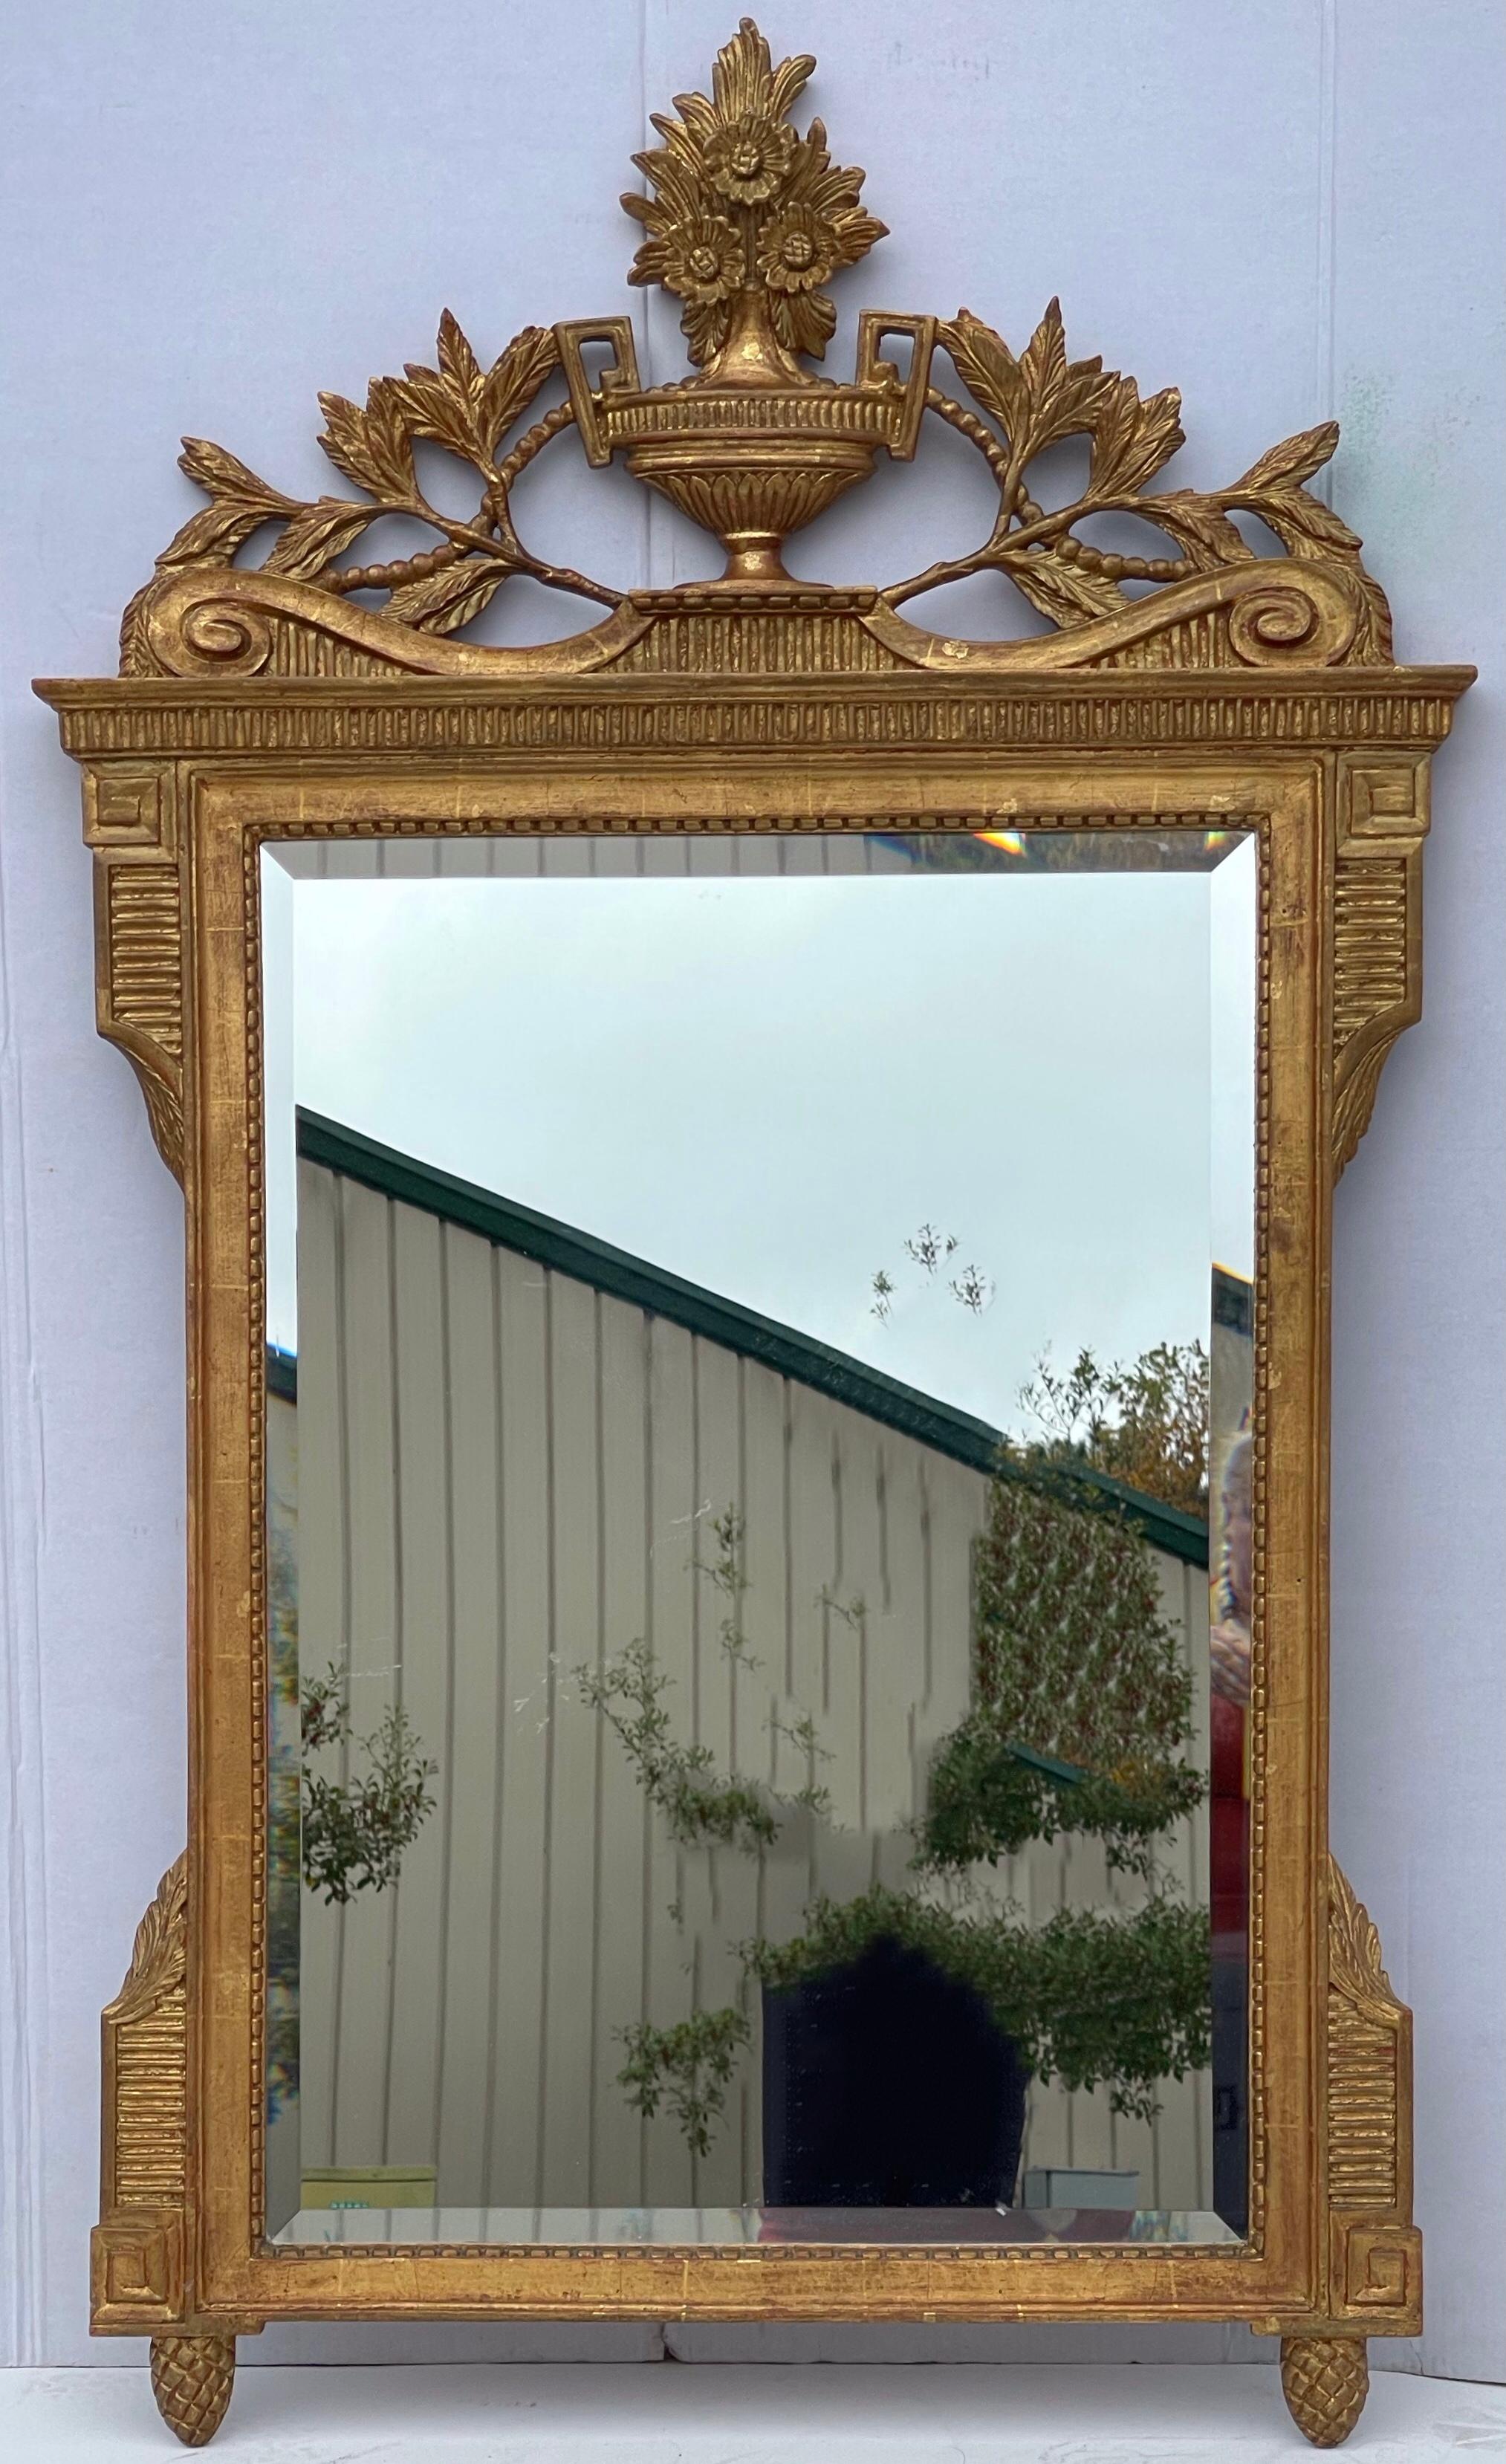 These are beautiful! This is a pair of Italian neo-classical style carved giltwood mirrors. They were crafted for Mirror Fair and distributed out of New York. The pediment is gorgeous with an urn that has a floral spray and Greek key form handles.